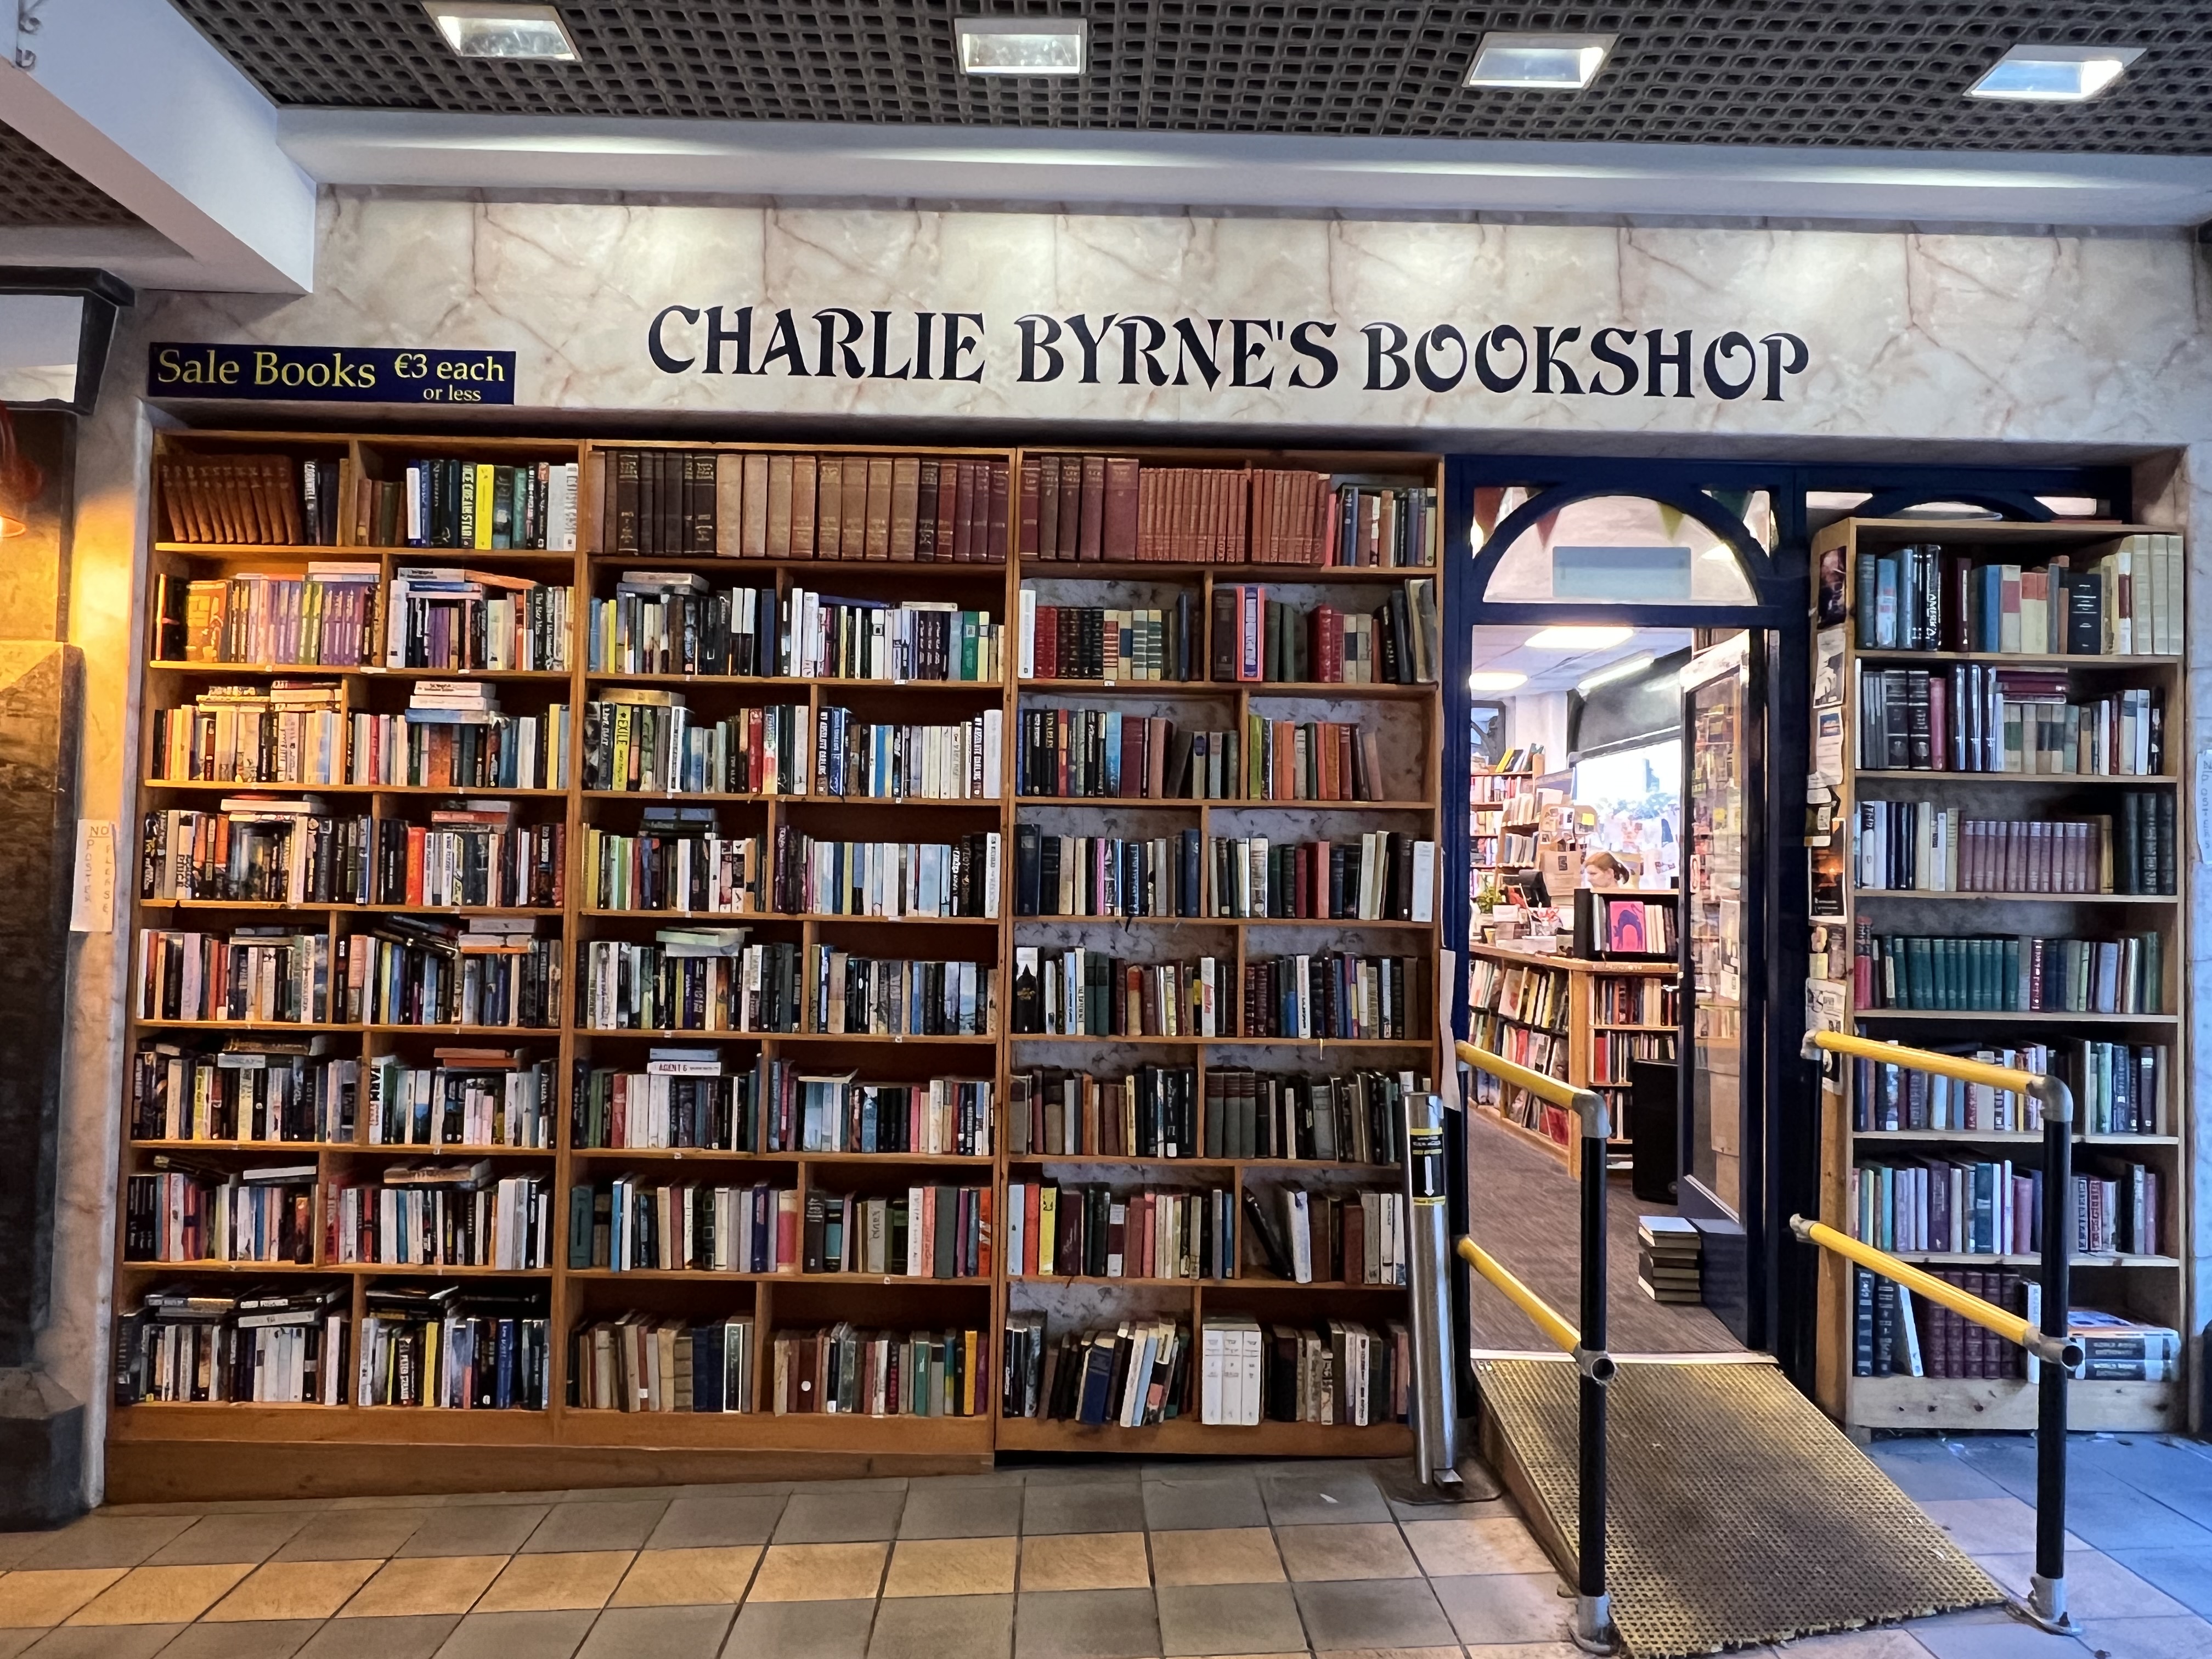 Entrance to book store filled with bookshelves